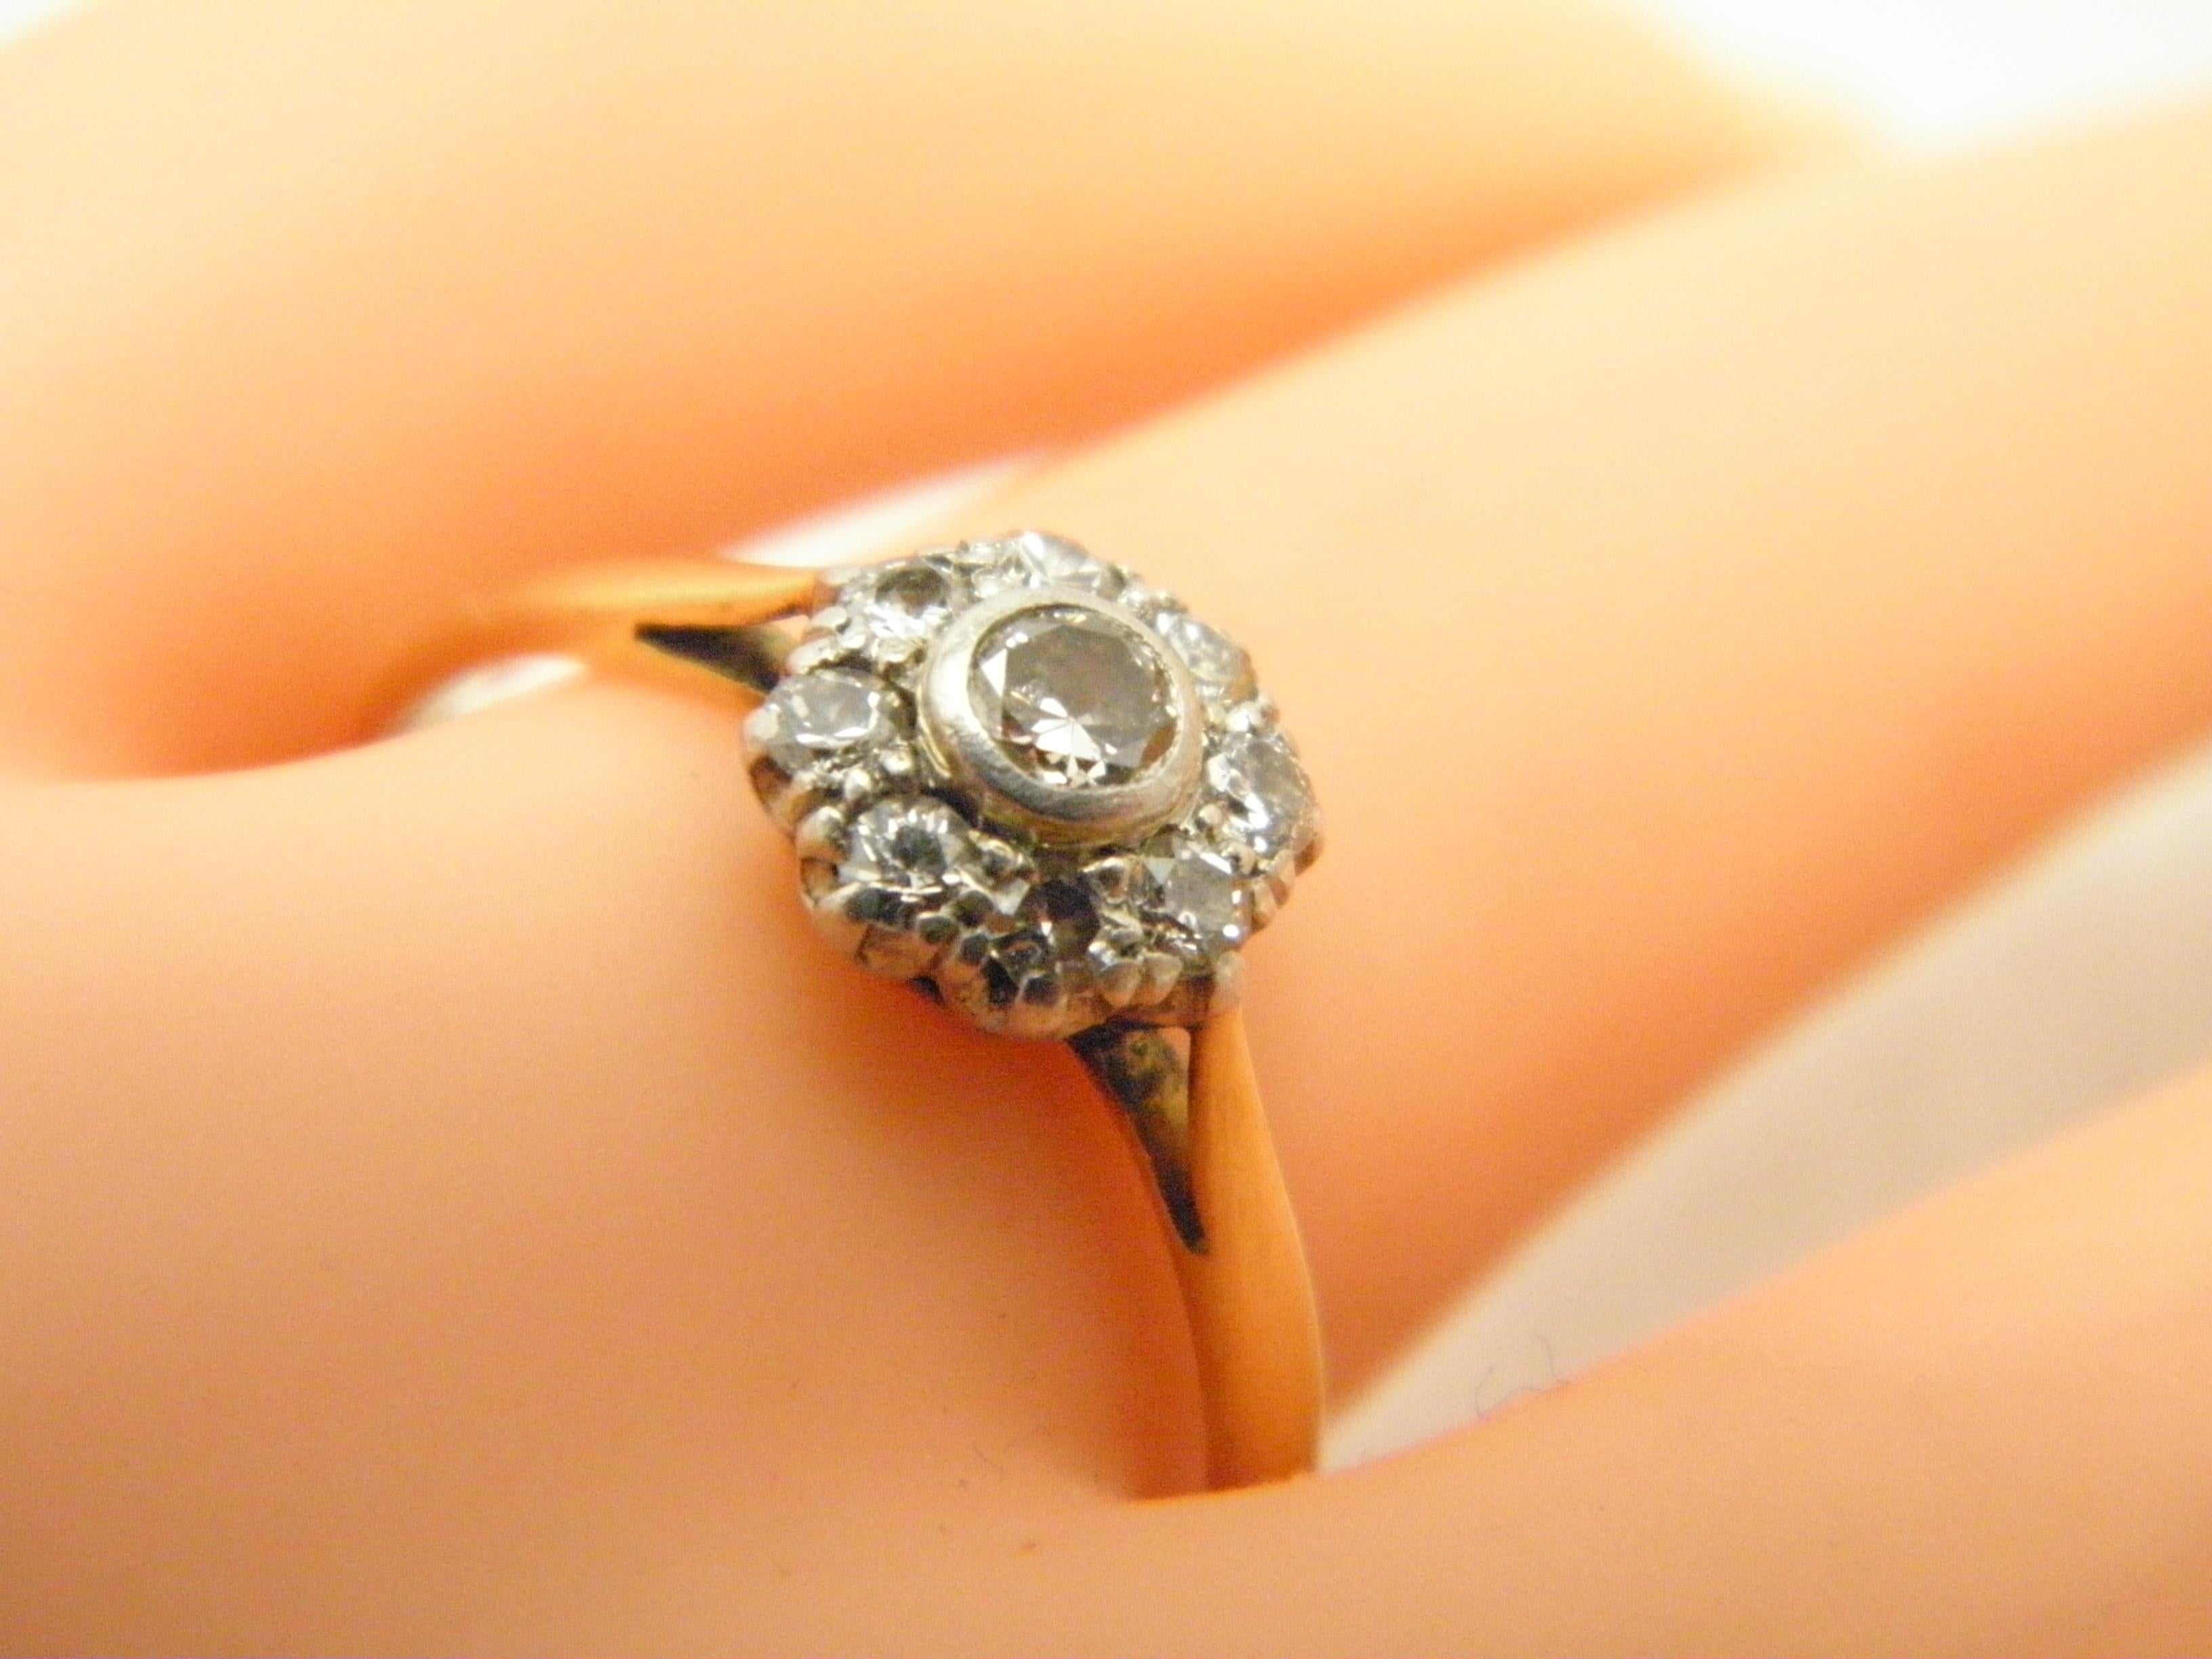 Antique 18ct Gold Platinum Diamond Cluster Gypsy Ring 750 950 Purity For Sale 1